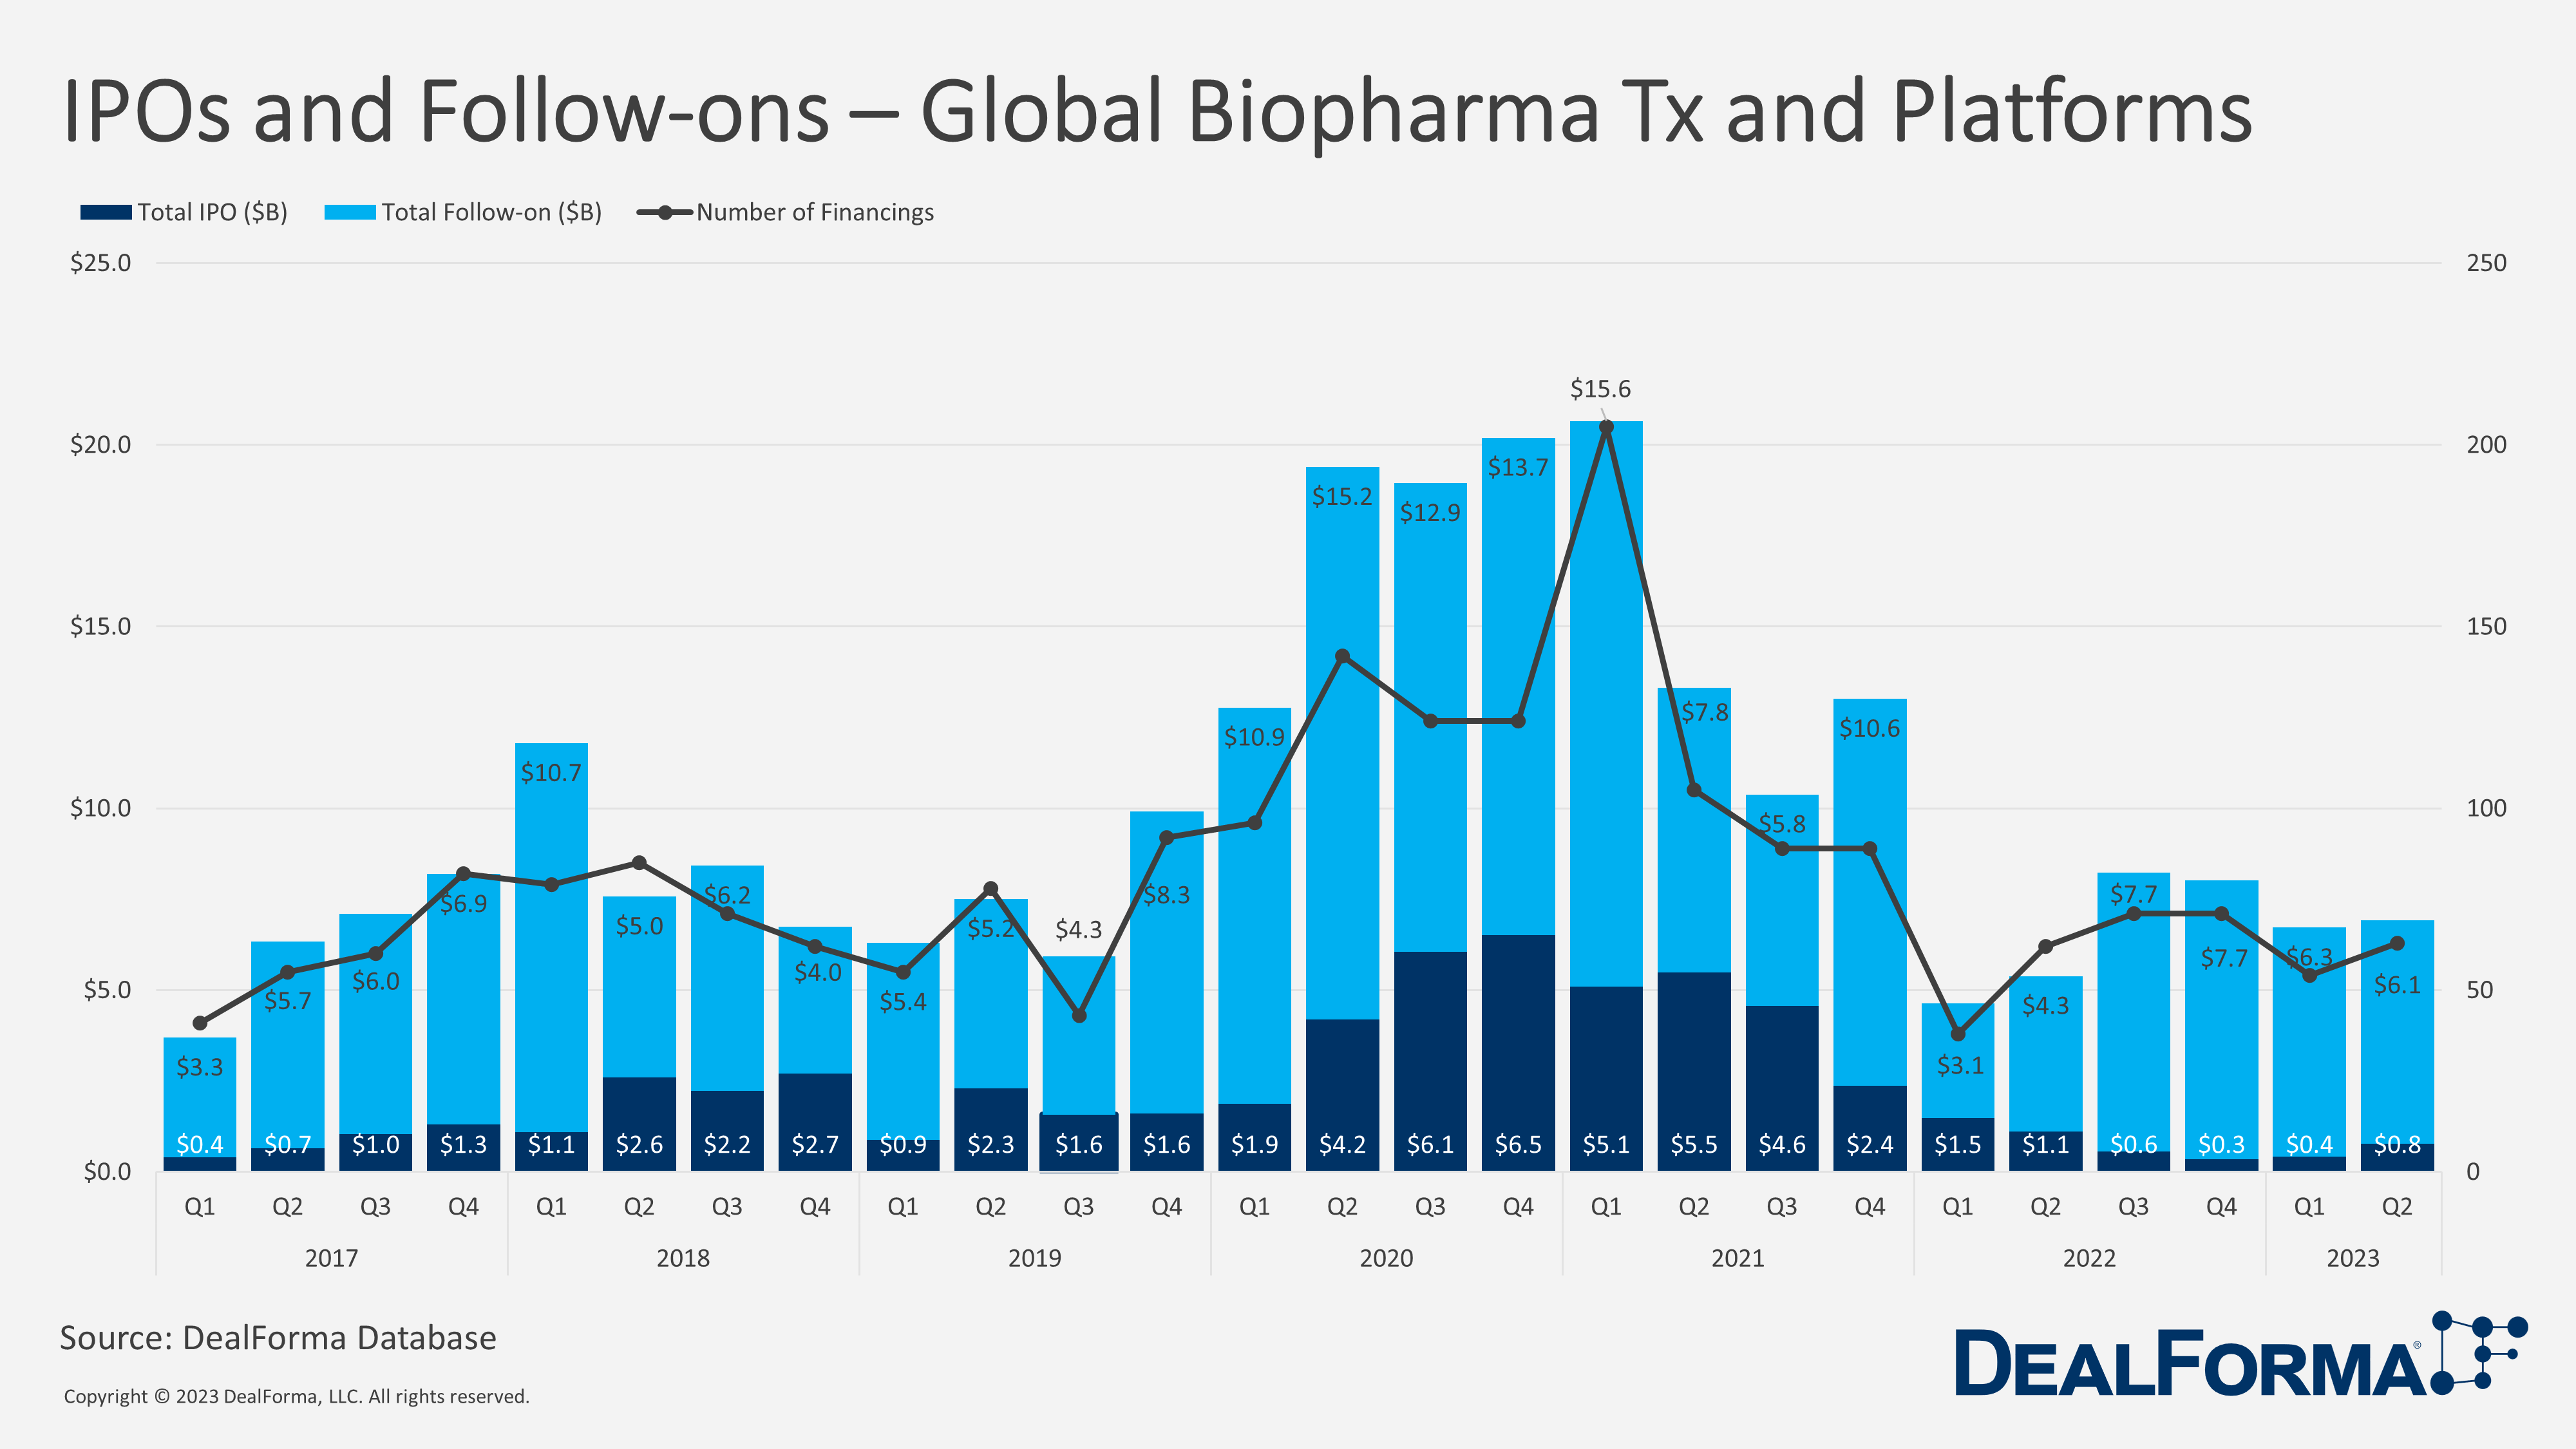 Dealforma - IPOs and Follow-ons - Biopharma Therapeutics and platforms